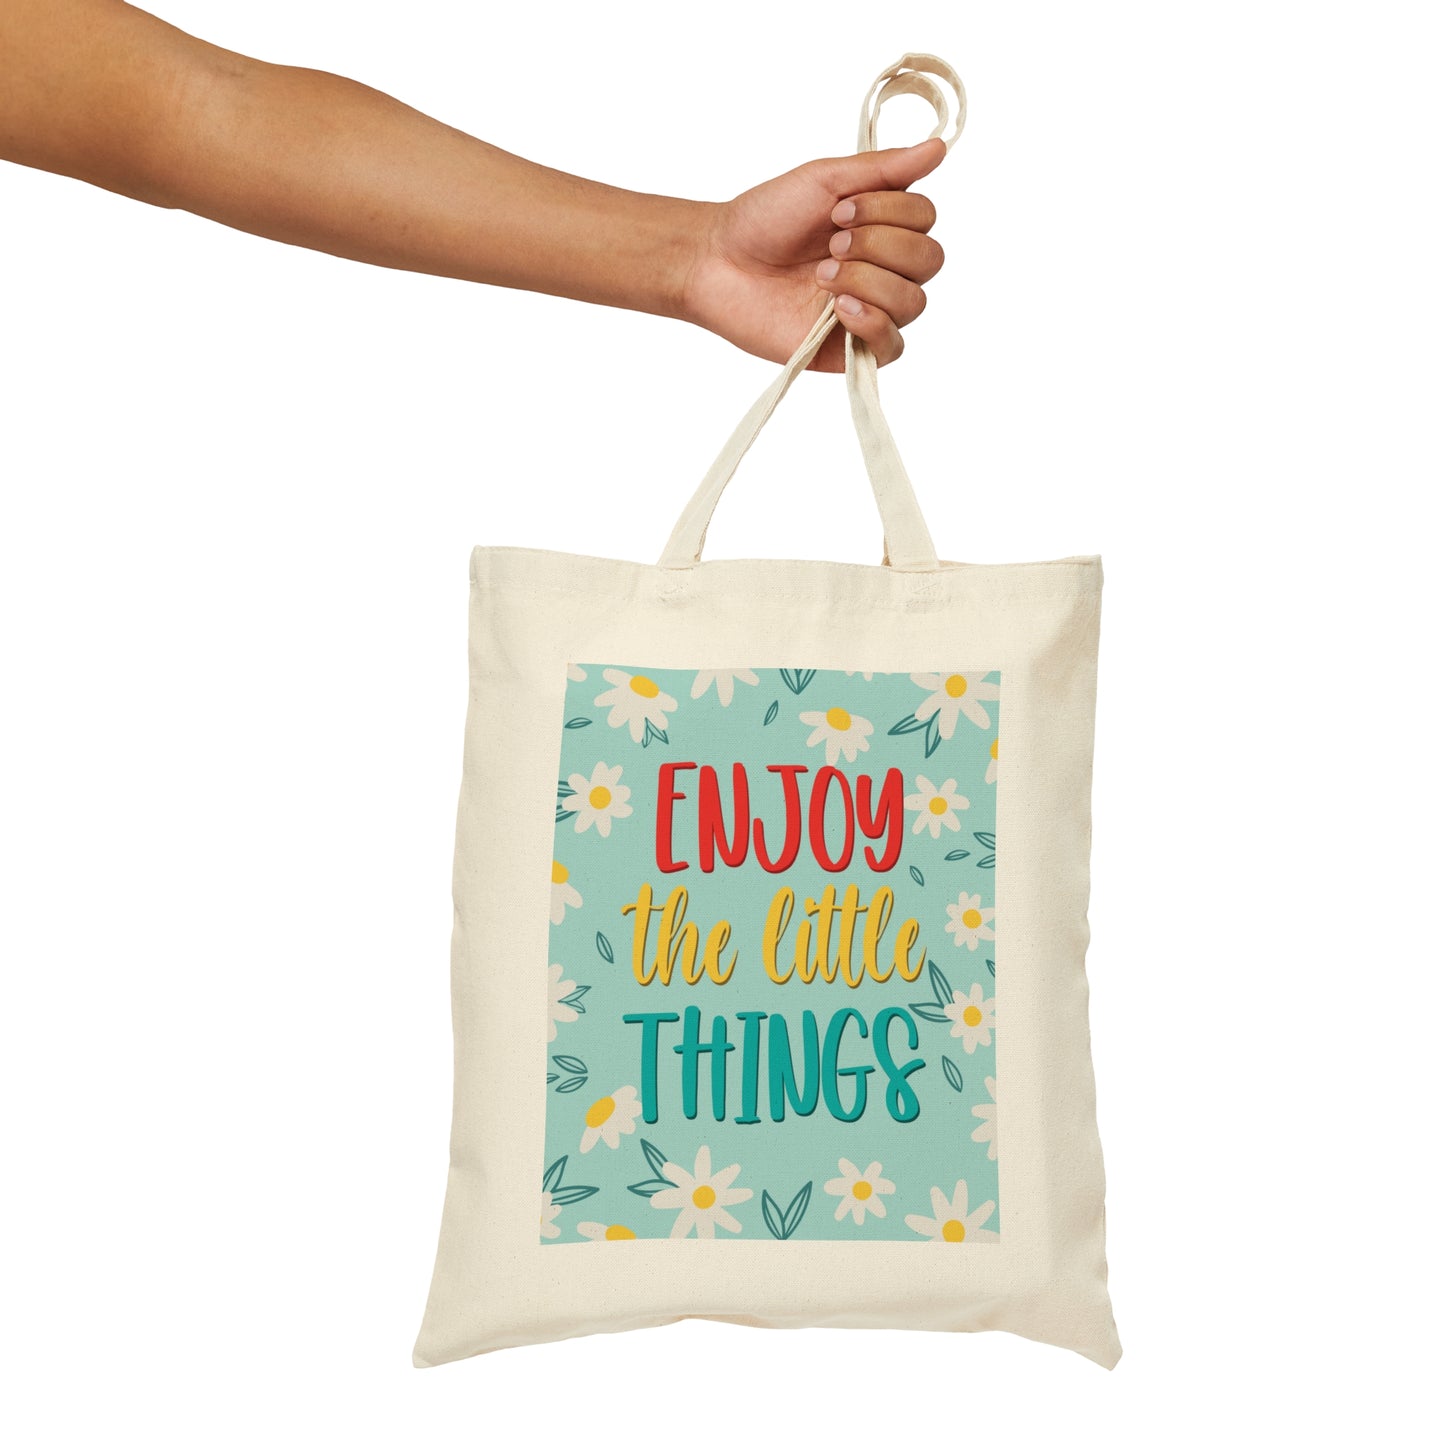 Enjoy The Little Things Art Canvas Shopping Cotton Tote Bag